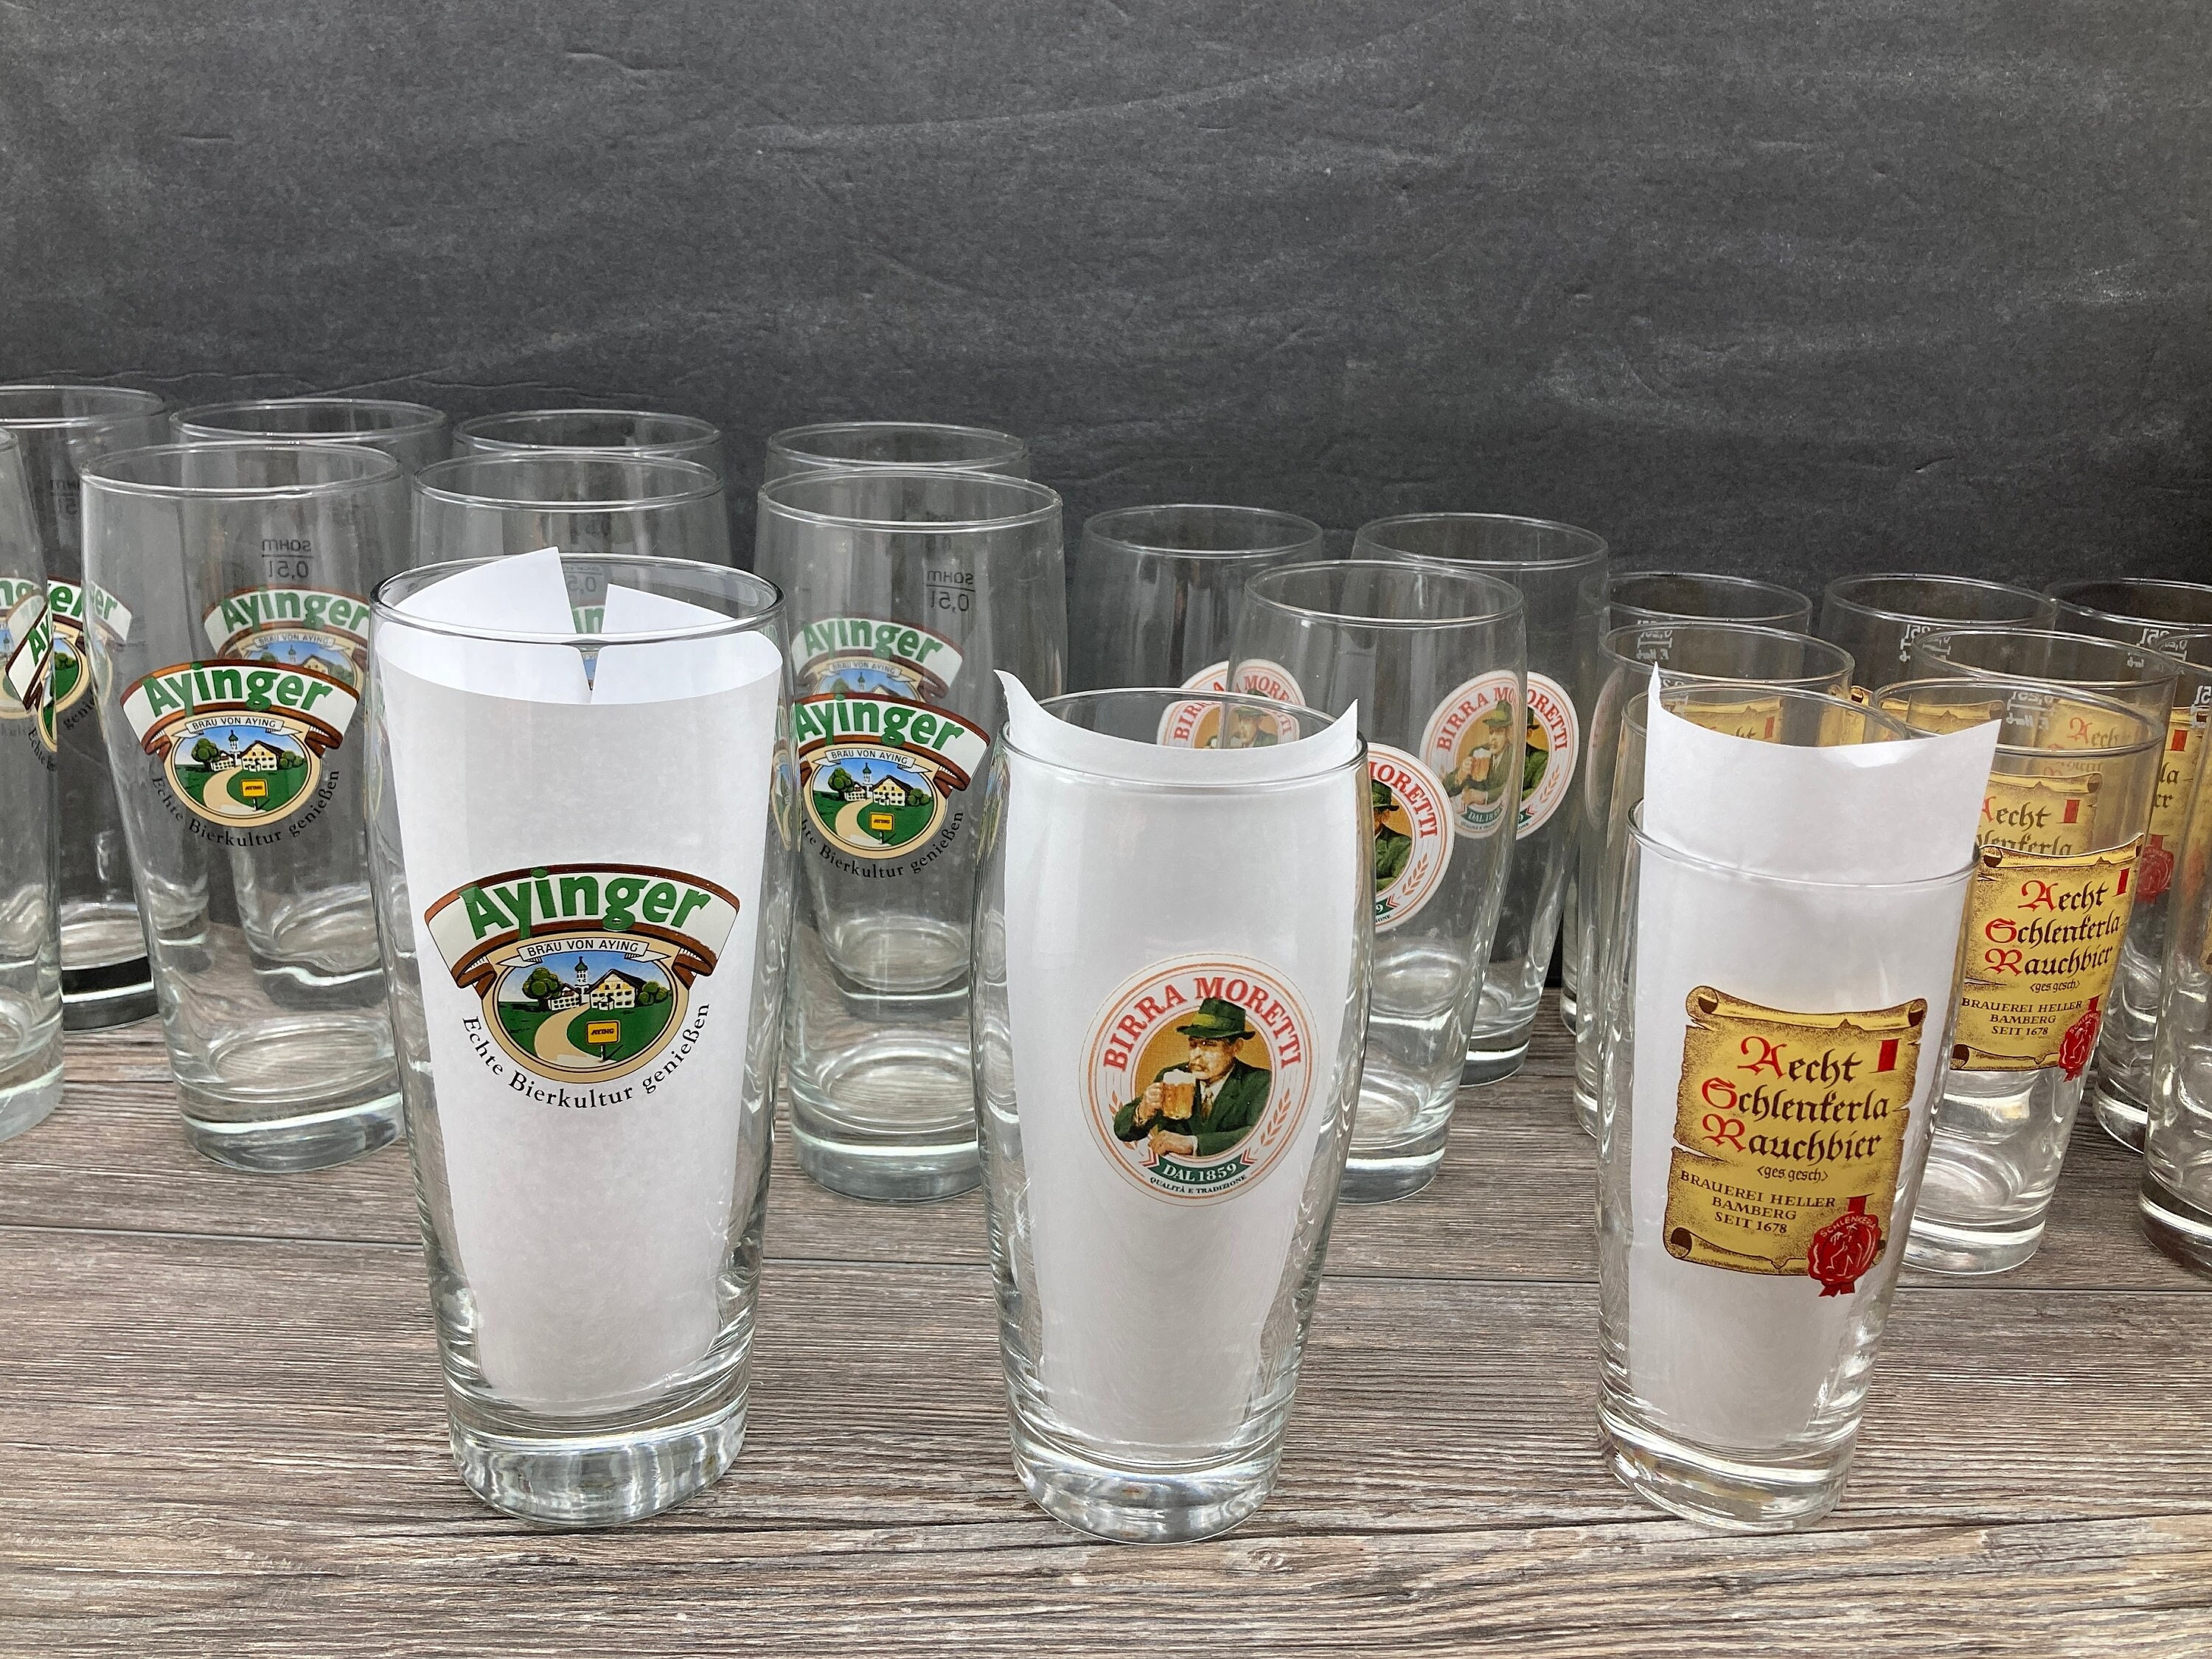 Mix or Match Pint Glasses Beer Glasses Set of 6 Gifts for Men 